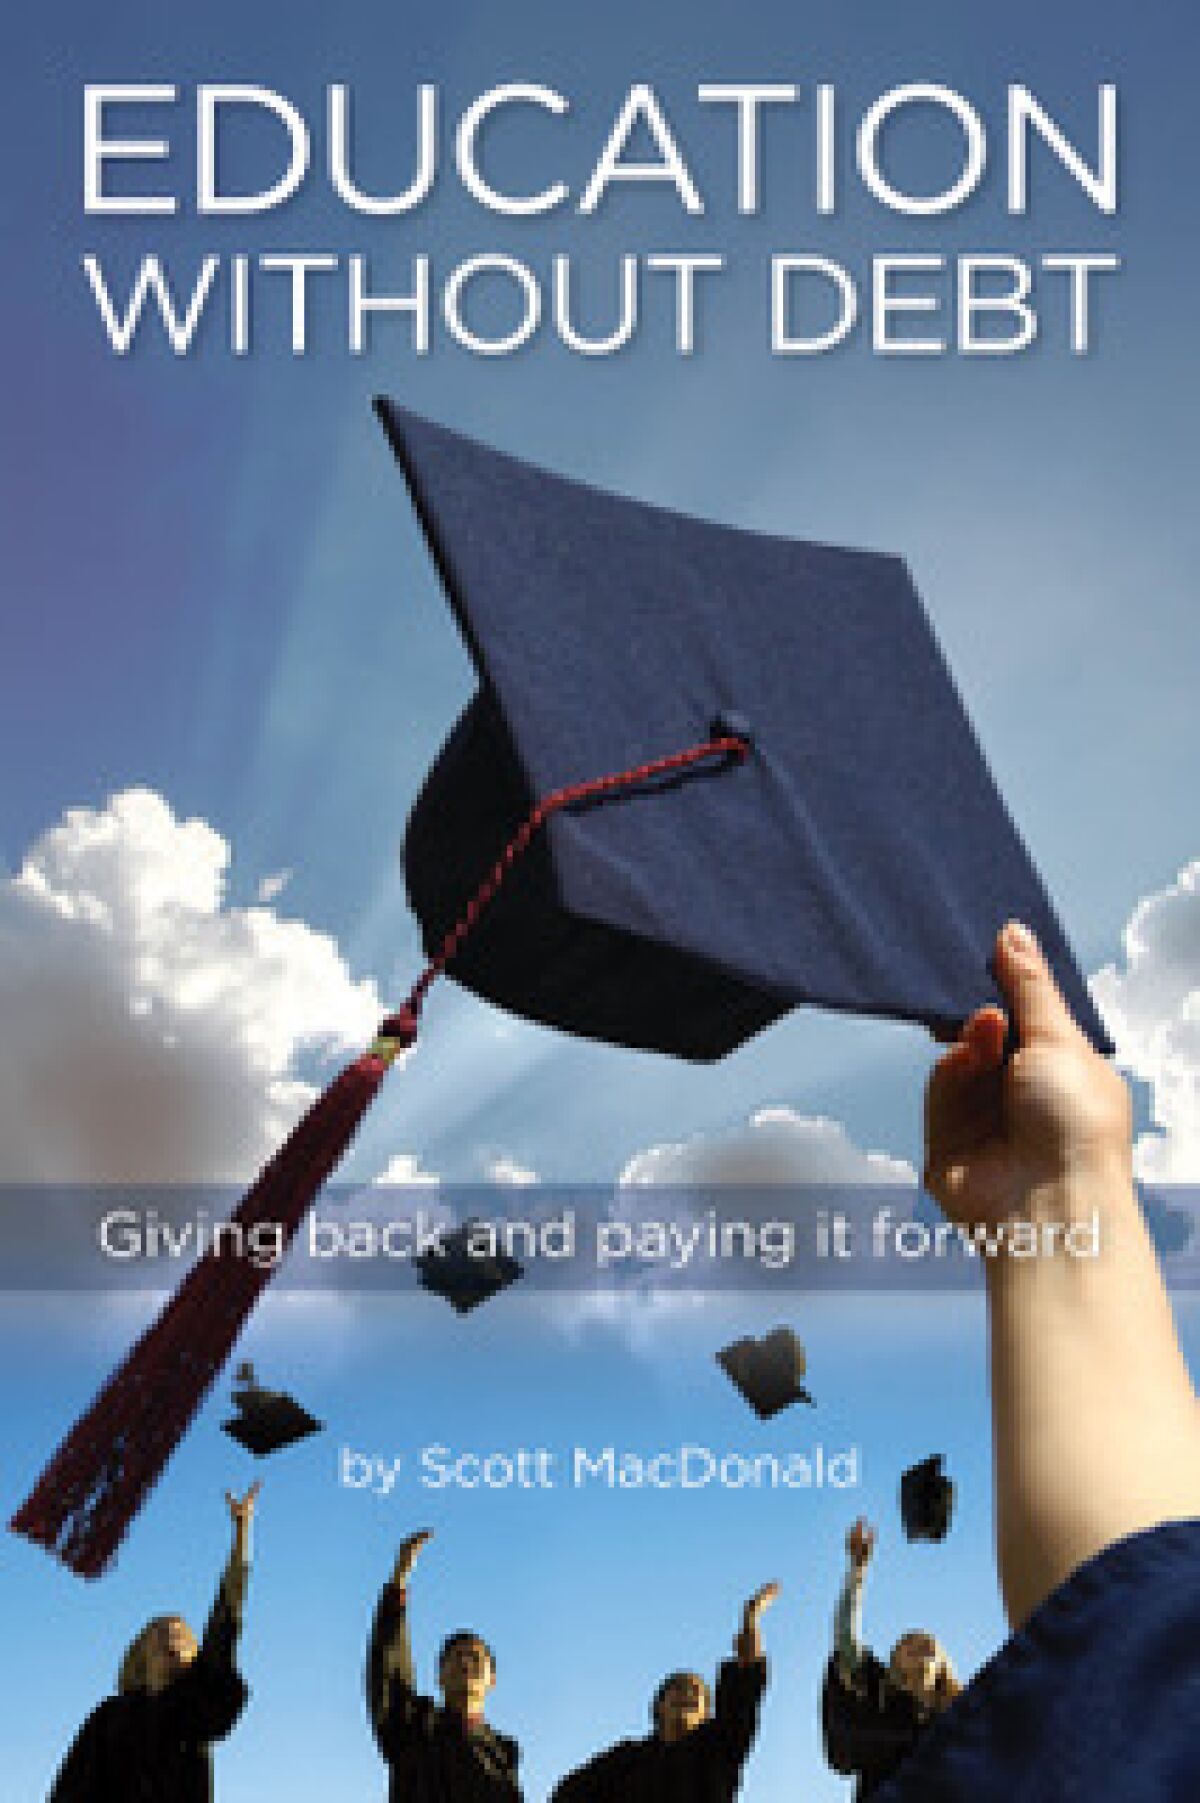 The cover of "Education Without Debt" by Scott MacDonald